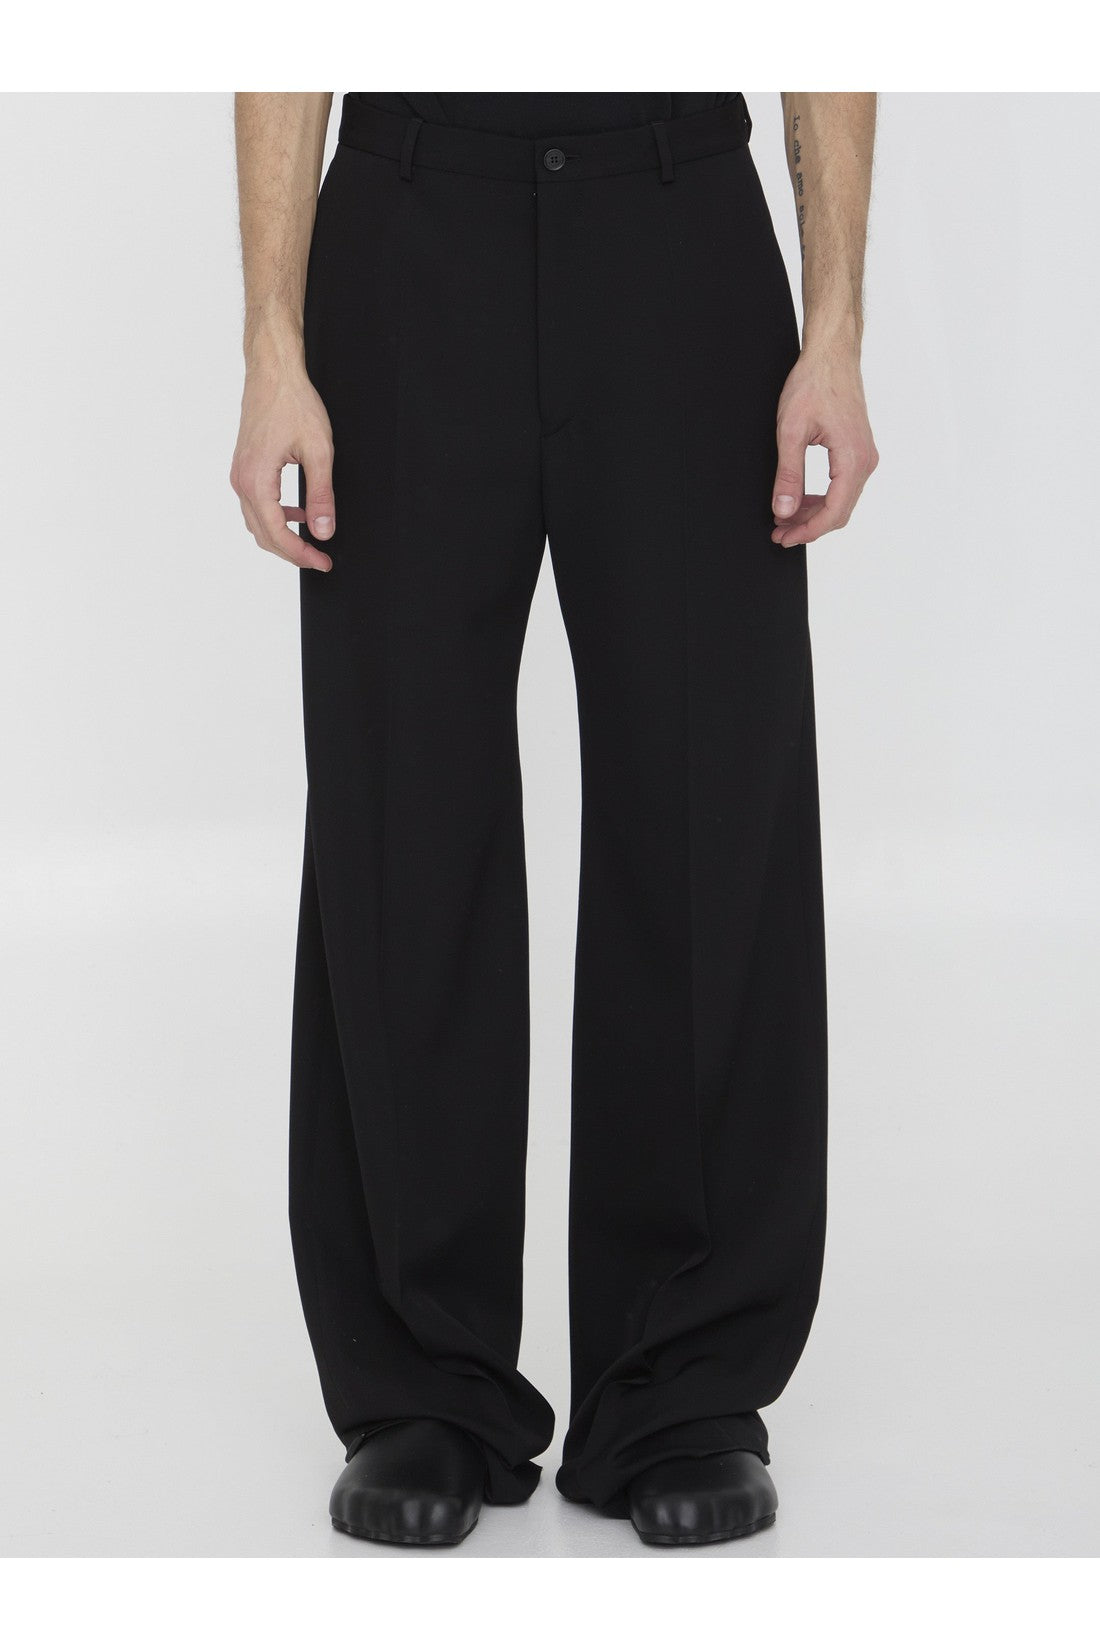 BALENCIAGA-OUTLET-SALE-Tailored-trousers-Hosen-S-BLACK-ARCHIVE-COLLECTION.jpg